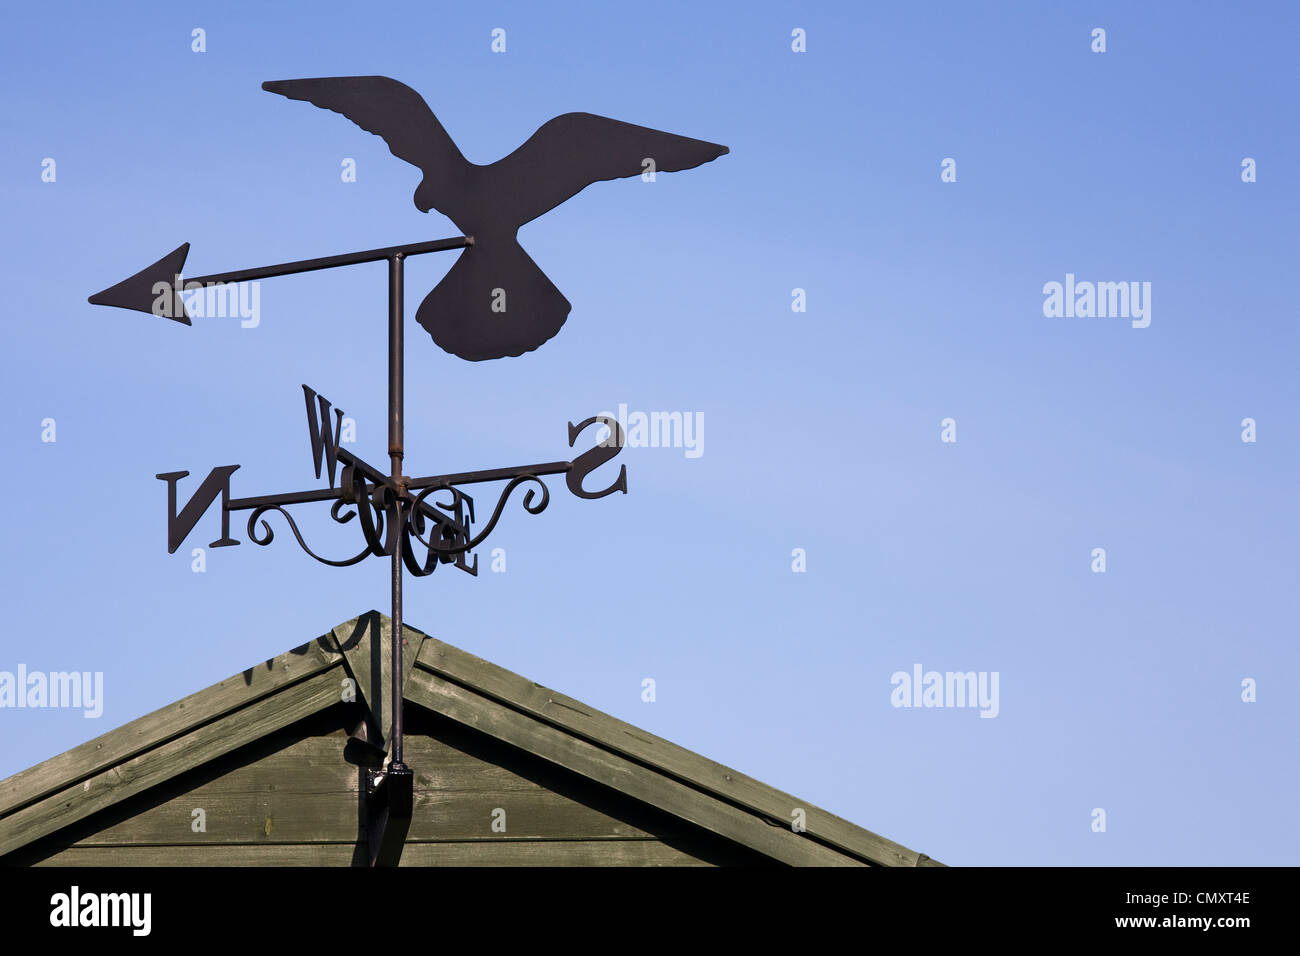 Falcon weather vane on a garden shed against a blue sky. Stock Photo